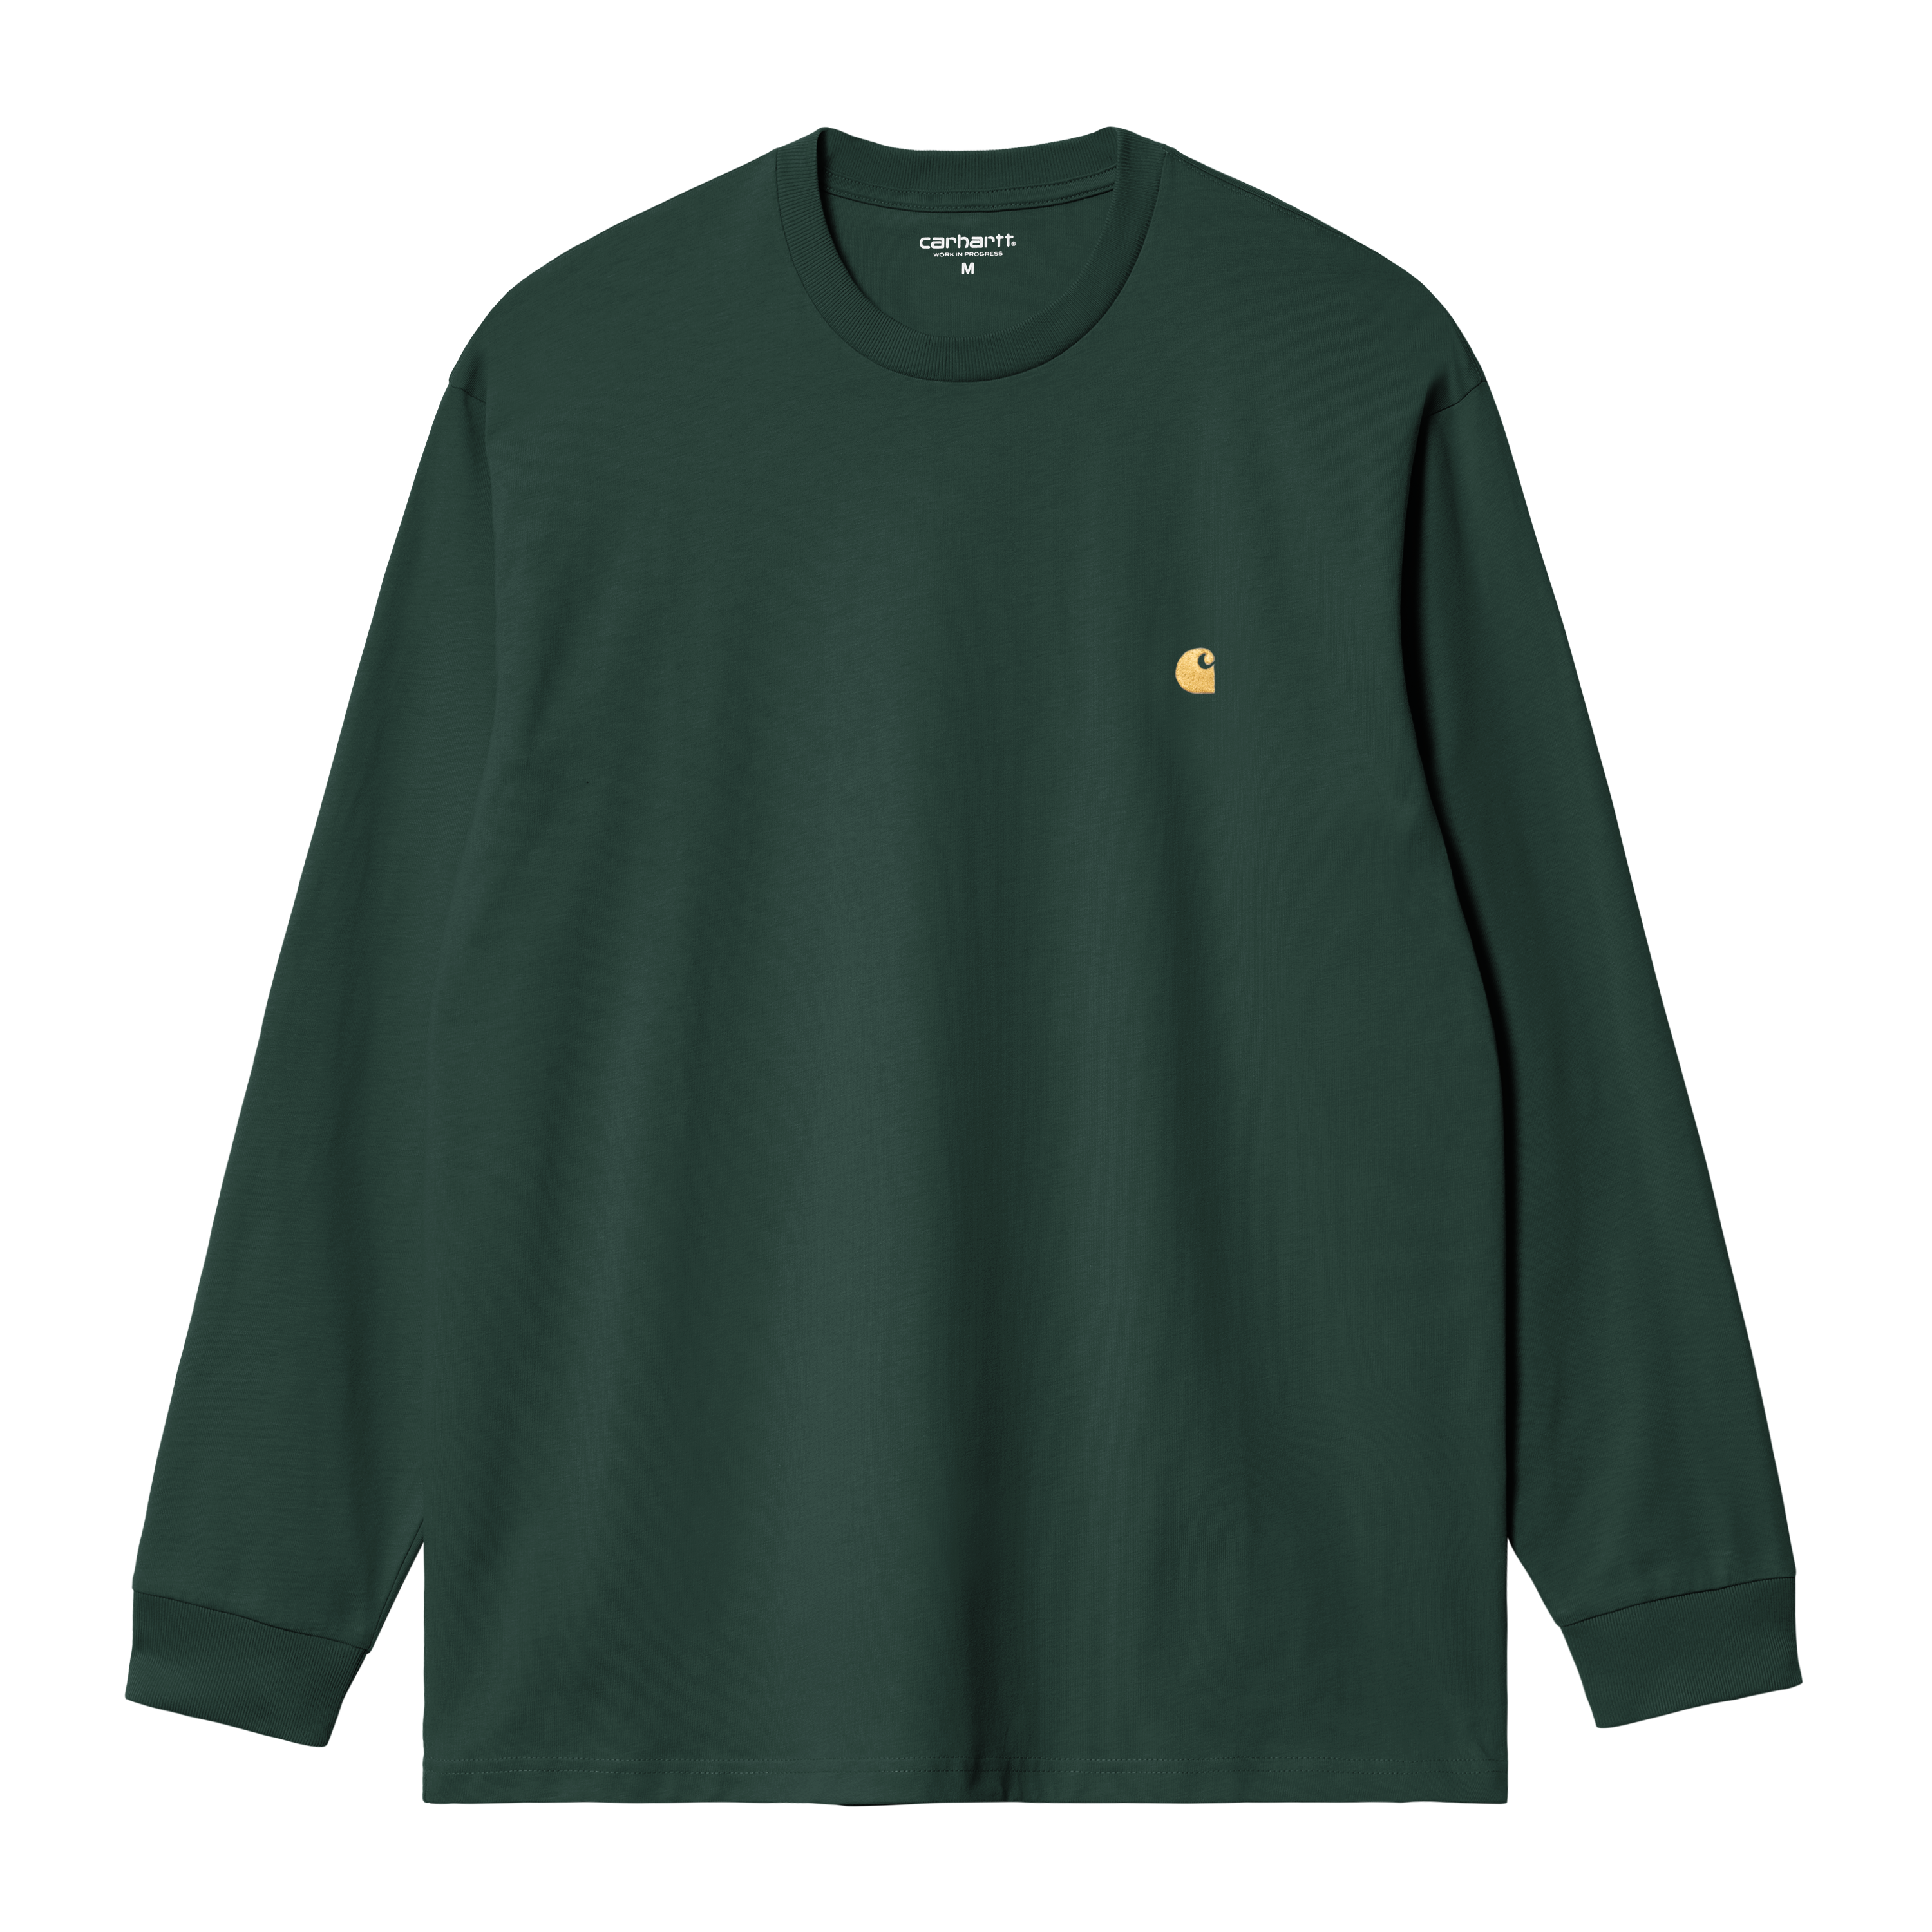 Carhartt WIP - L/S CHASE T-SHIRT - Discovery Green/Gold